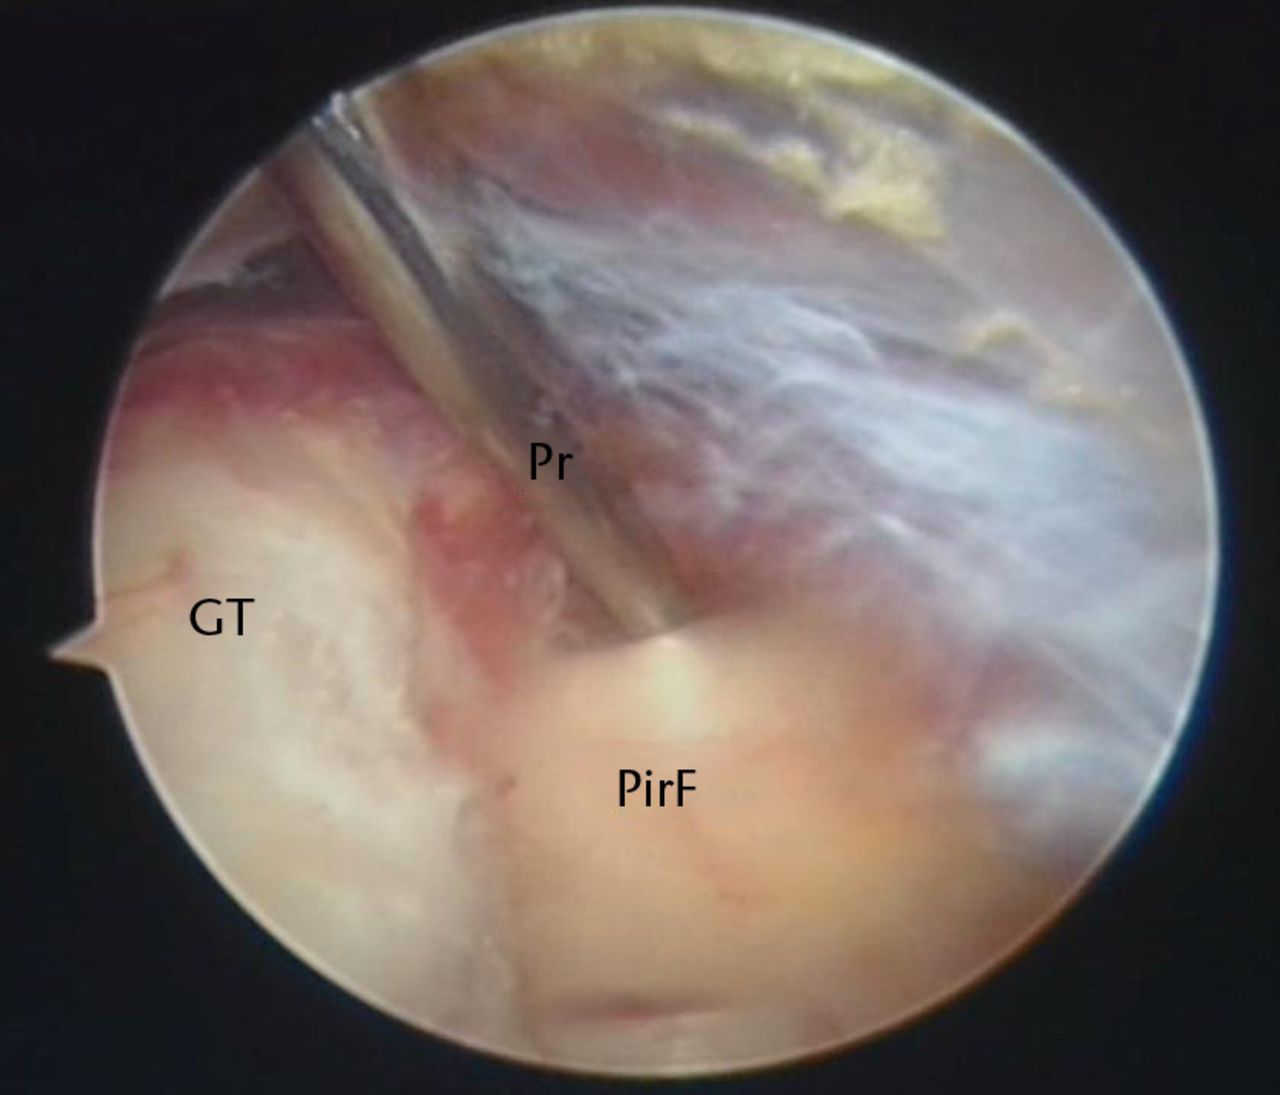 Figs. 3a - 3b 
          Endoscopic release of the piriformis
tendon and posterior hip capsule (GT, greater trochanter; Pr, endoscopic
probe; PirF, piriformis tendon; EcP, hooked coagulation probe).
        